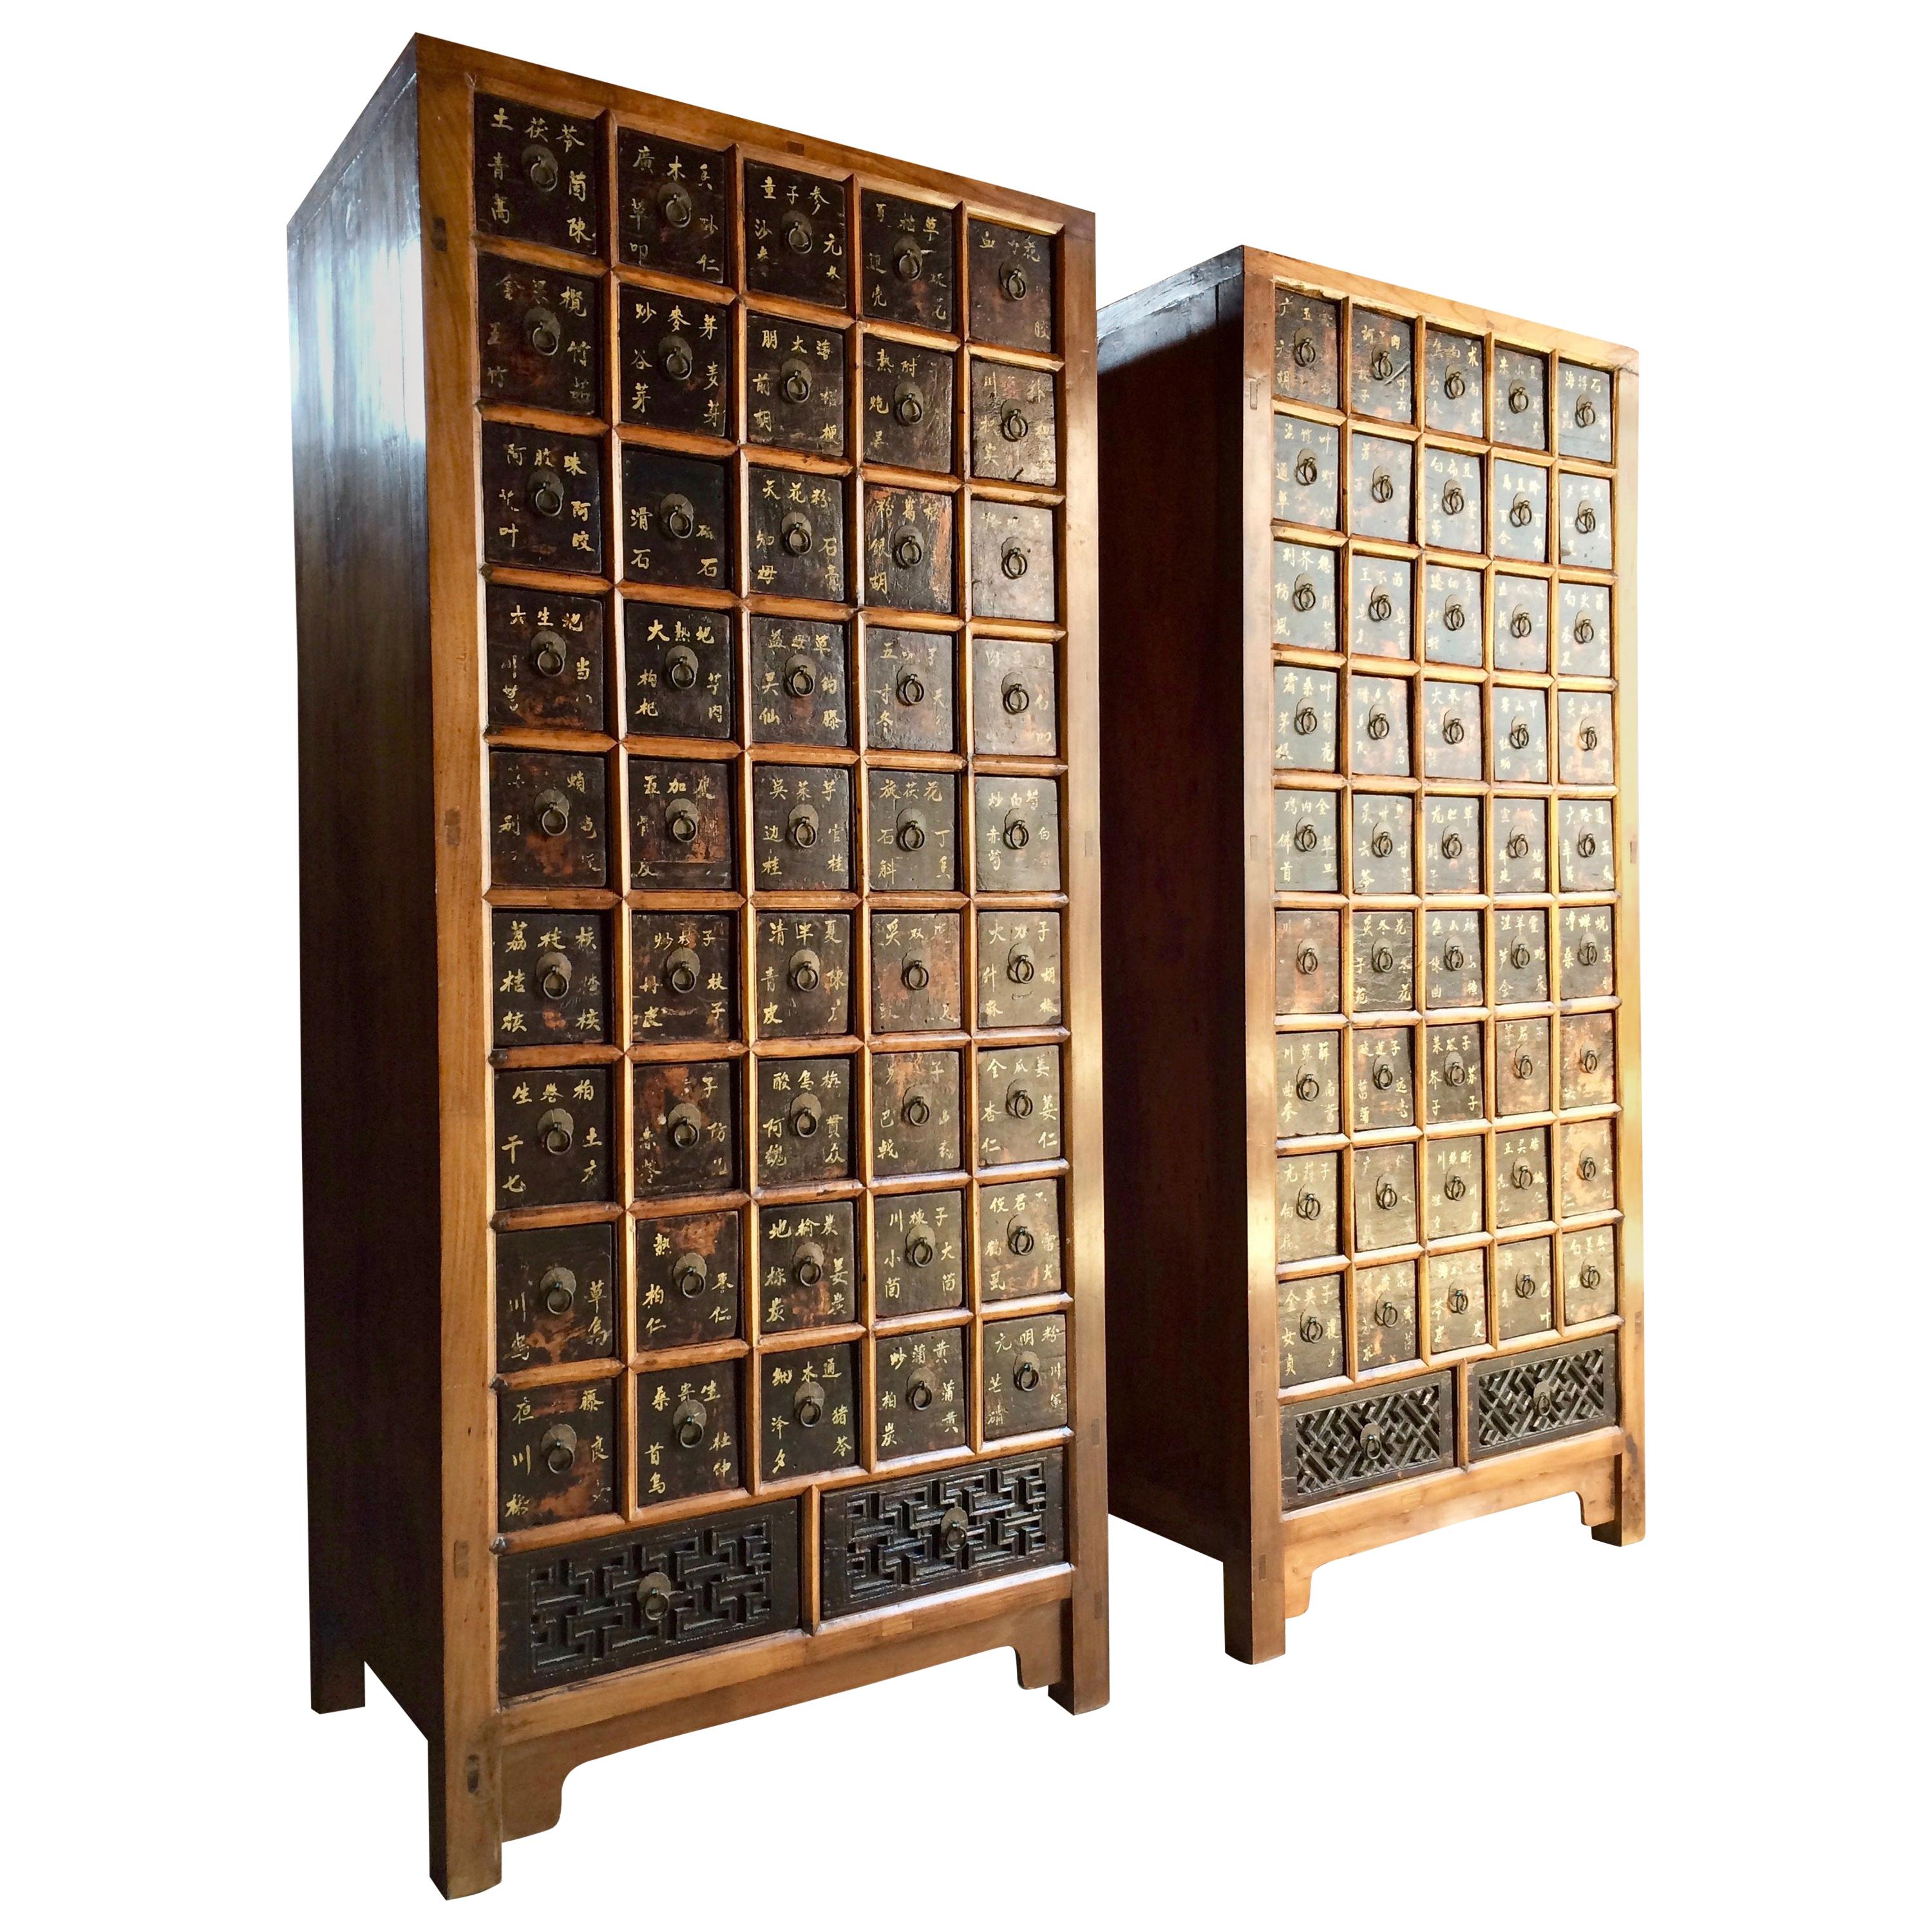 Apothecary Cabinets Elm Haberdashery Qing Dynasty, 19th century